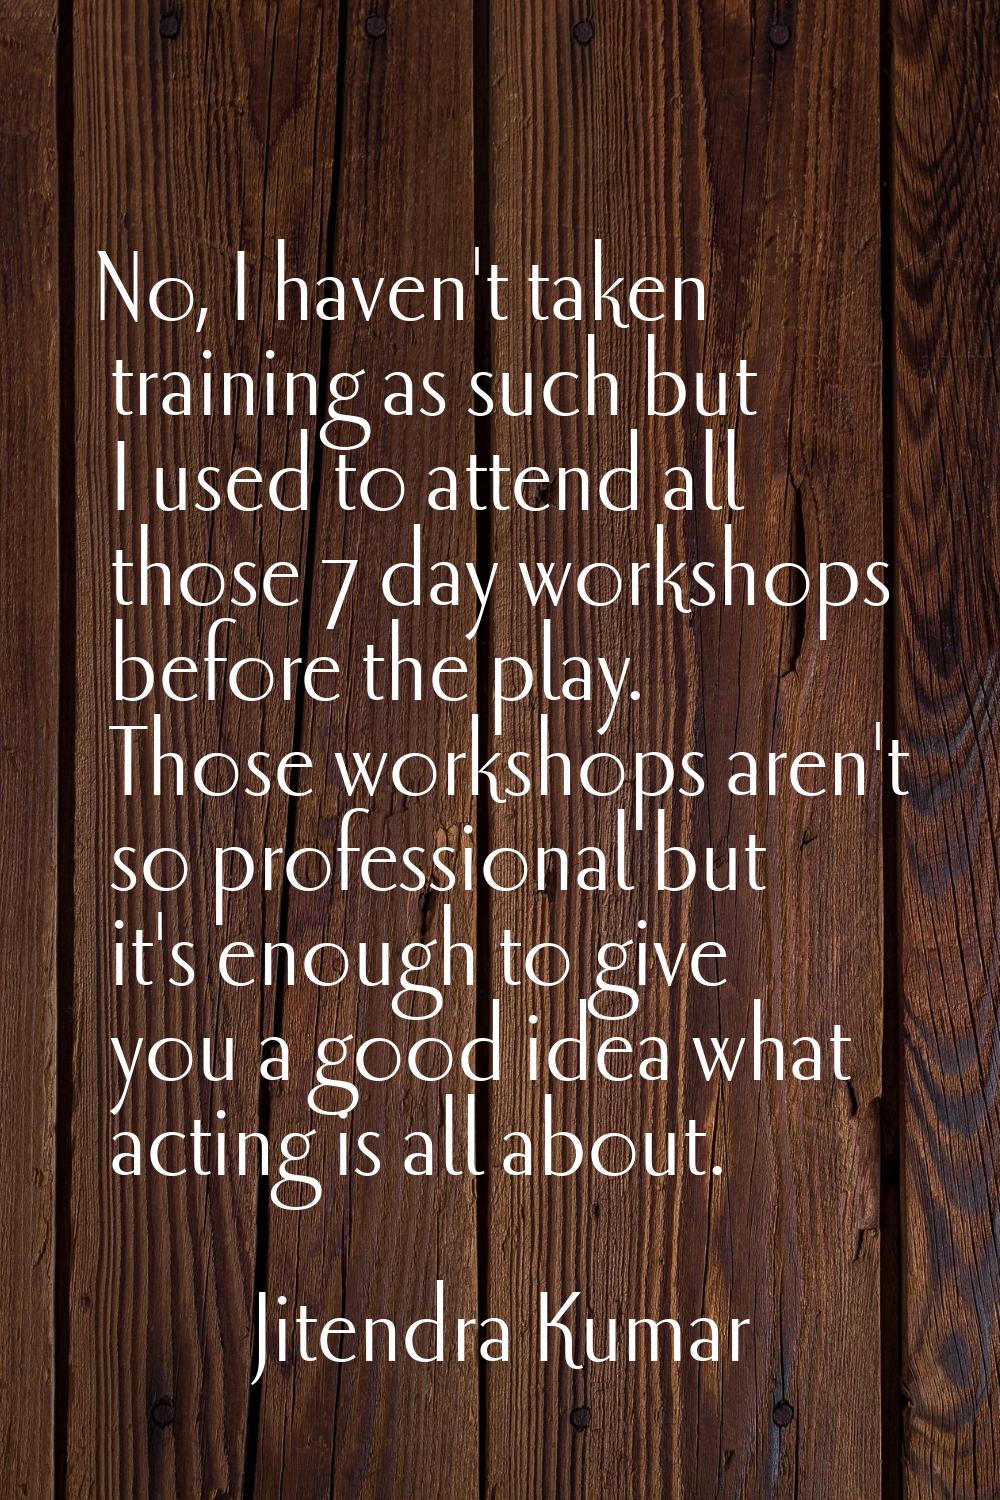 No, I haven't taken training as such but I used to attend all those 7 day workshops before the play